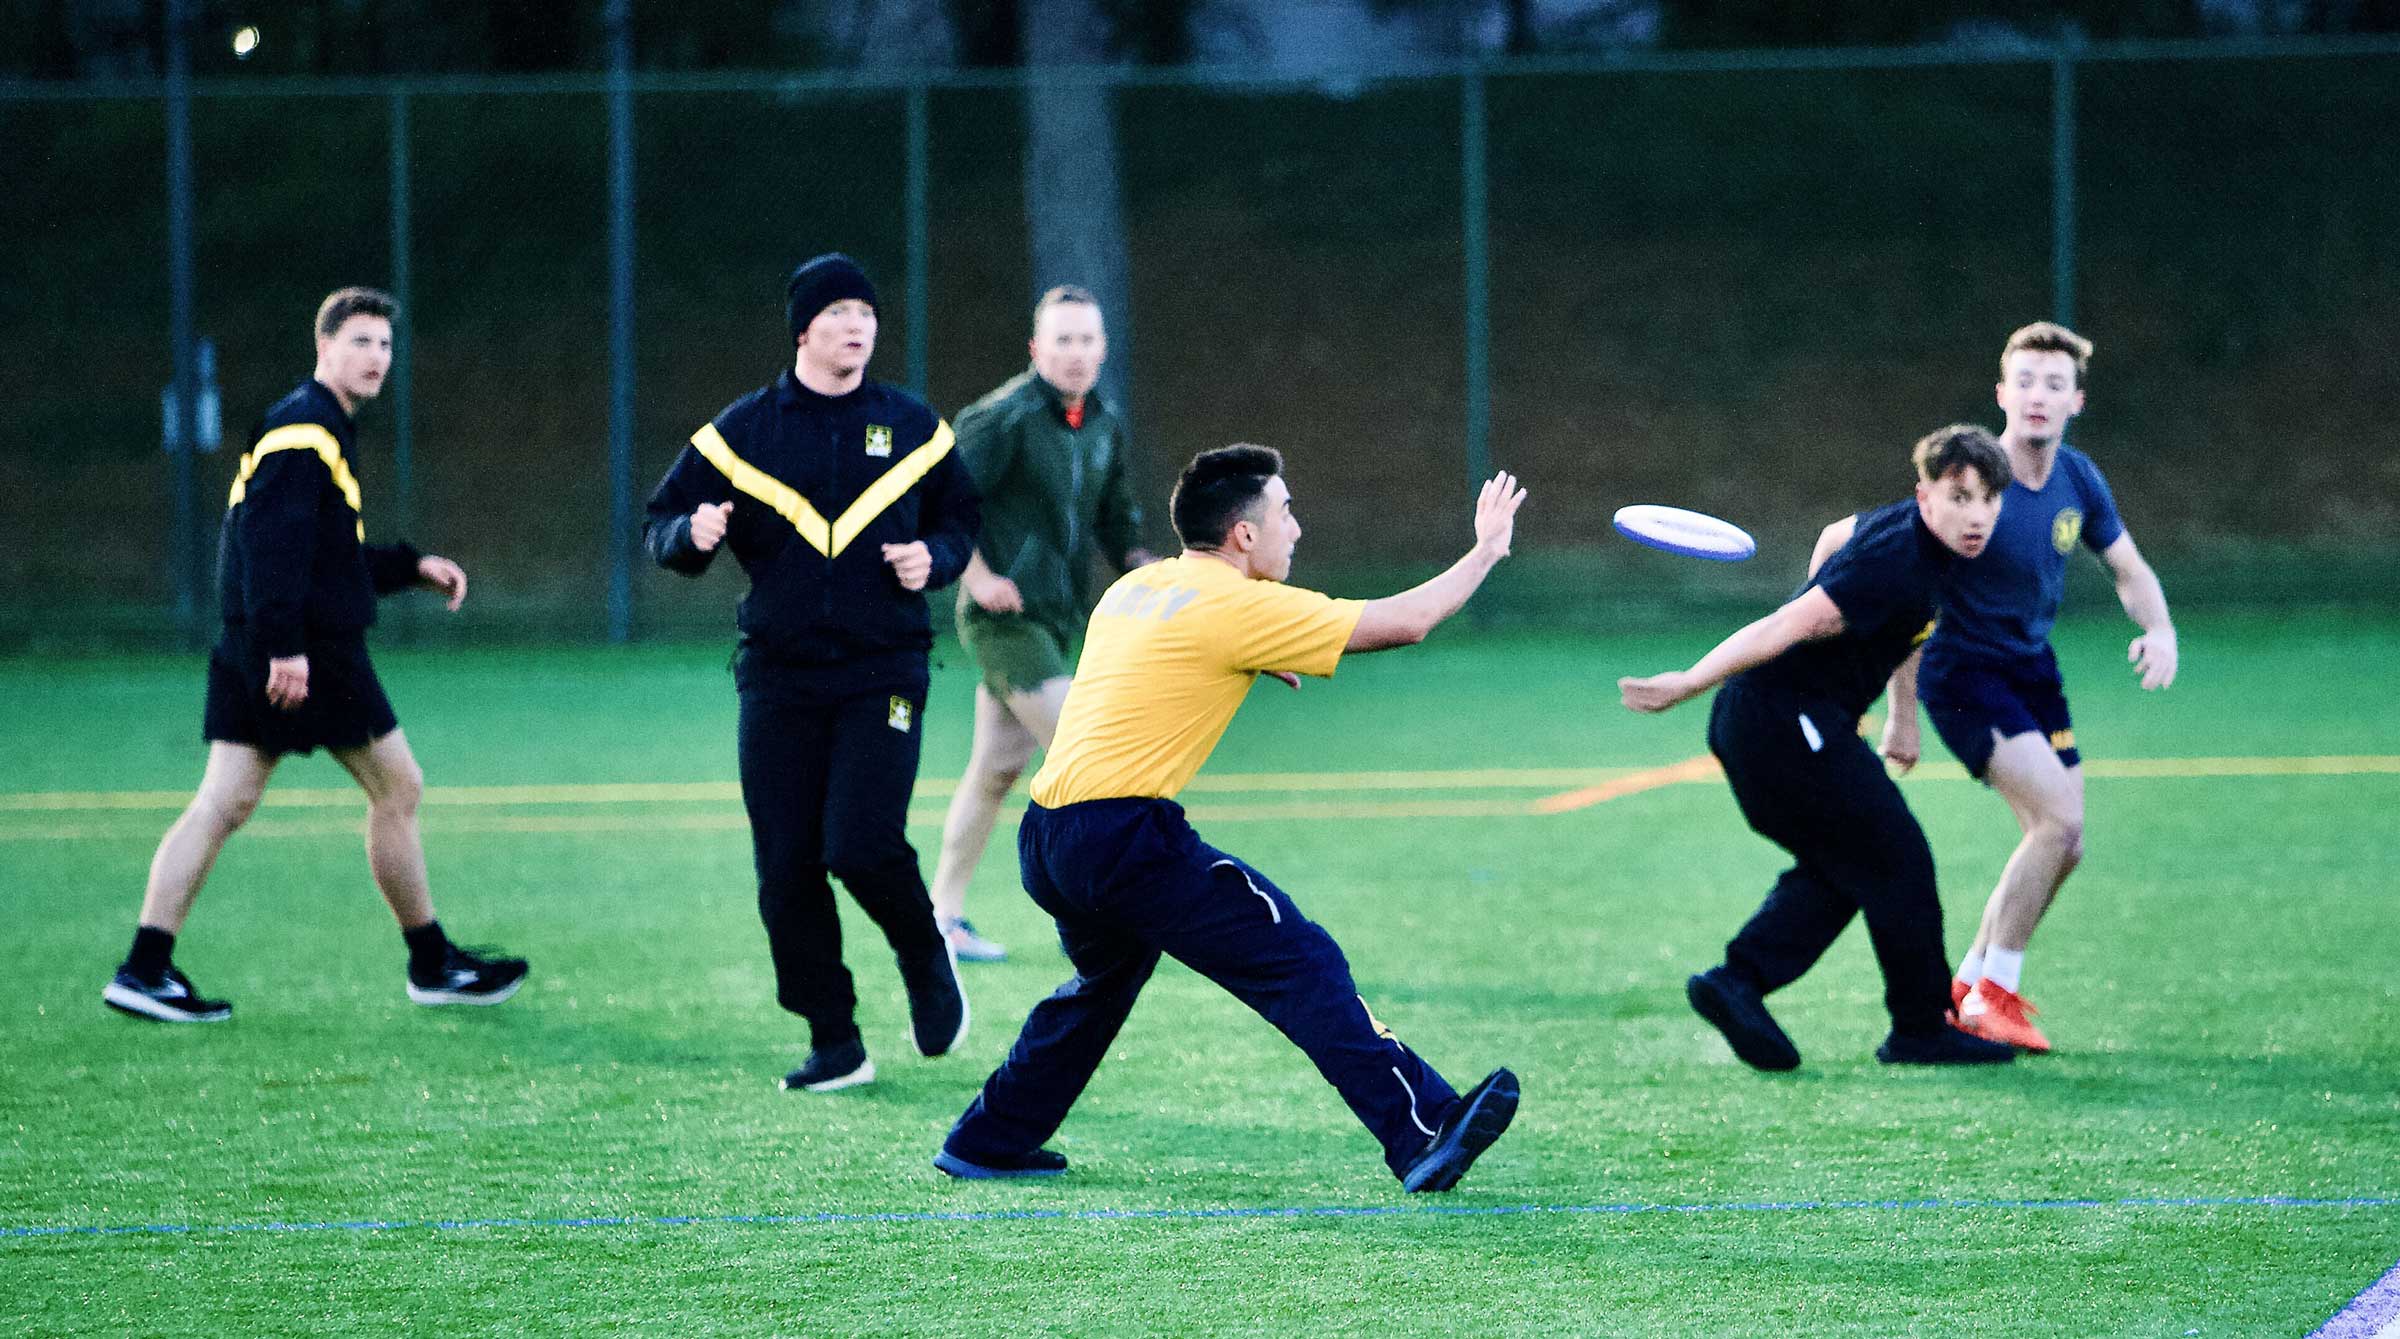 Navy Student Playing Flying Disc